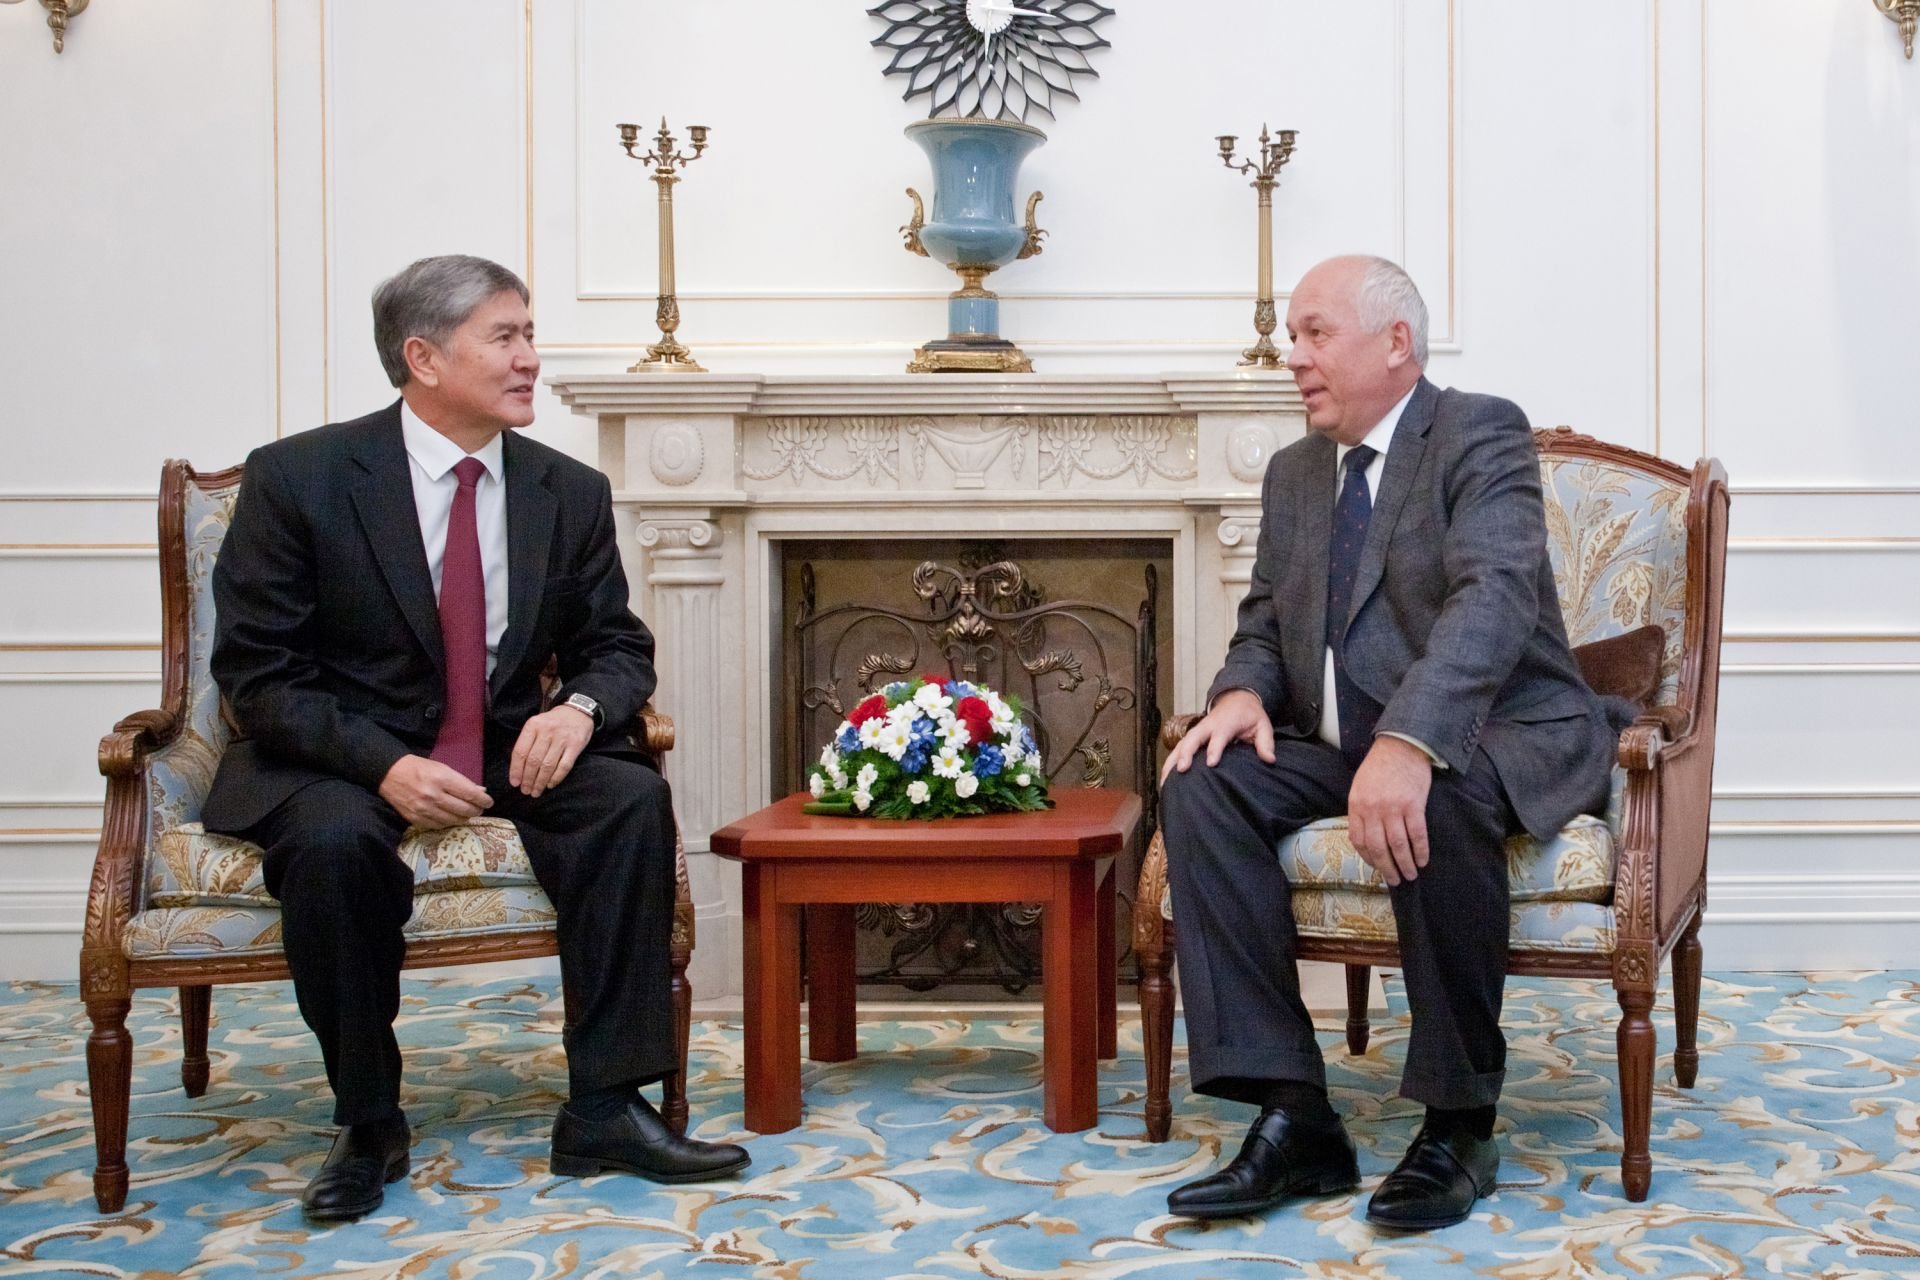 The meeting of Sergey Chemezov and the President of Kyrgyzstan